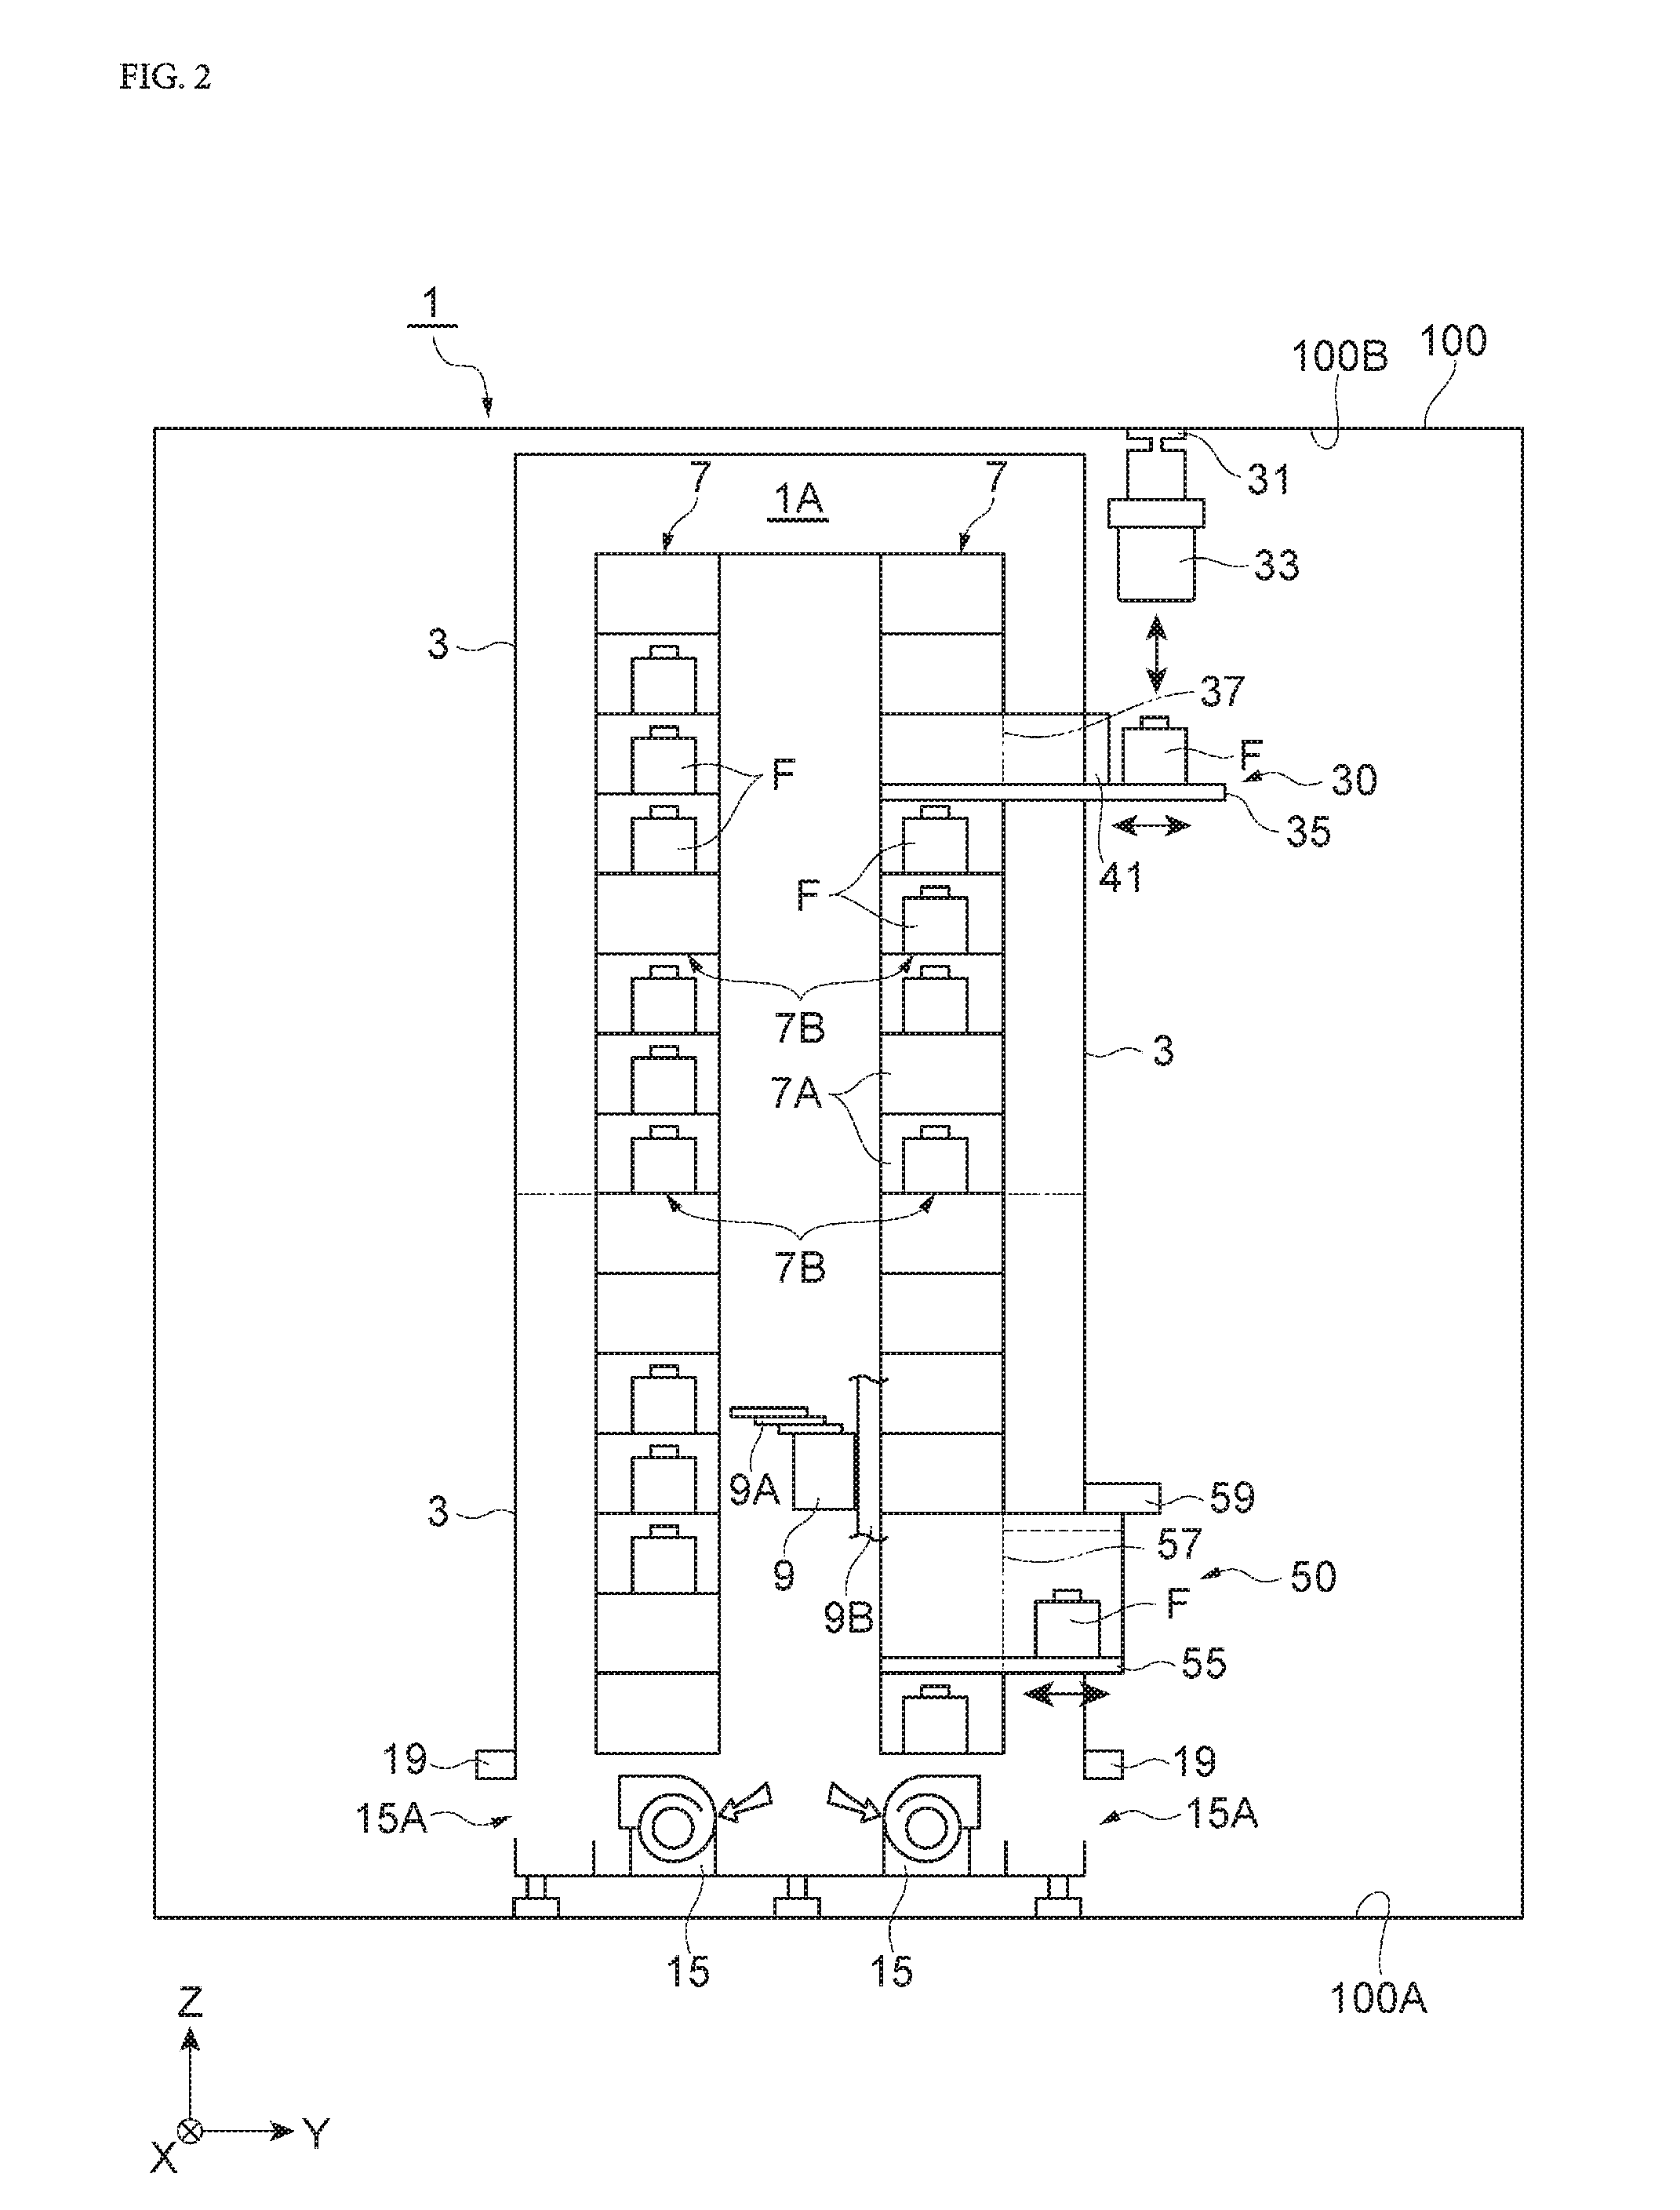 Purge device and method of diffusing gas including purge gas